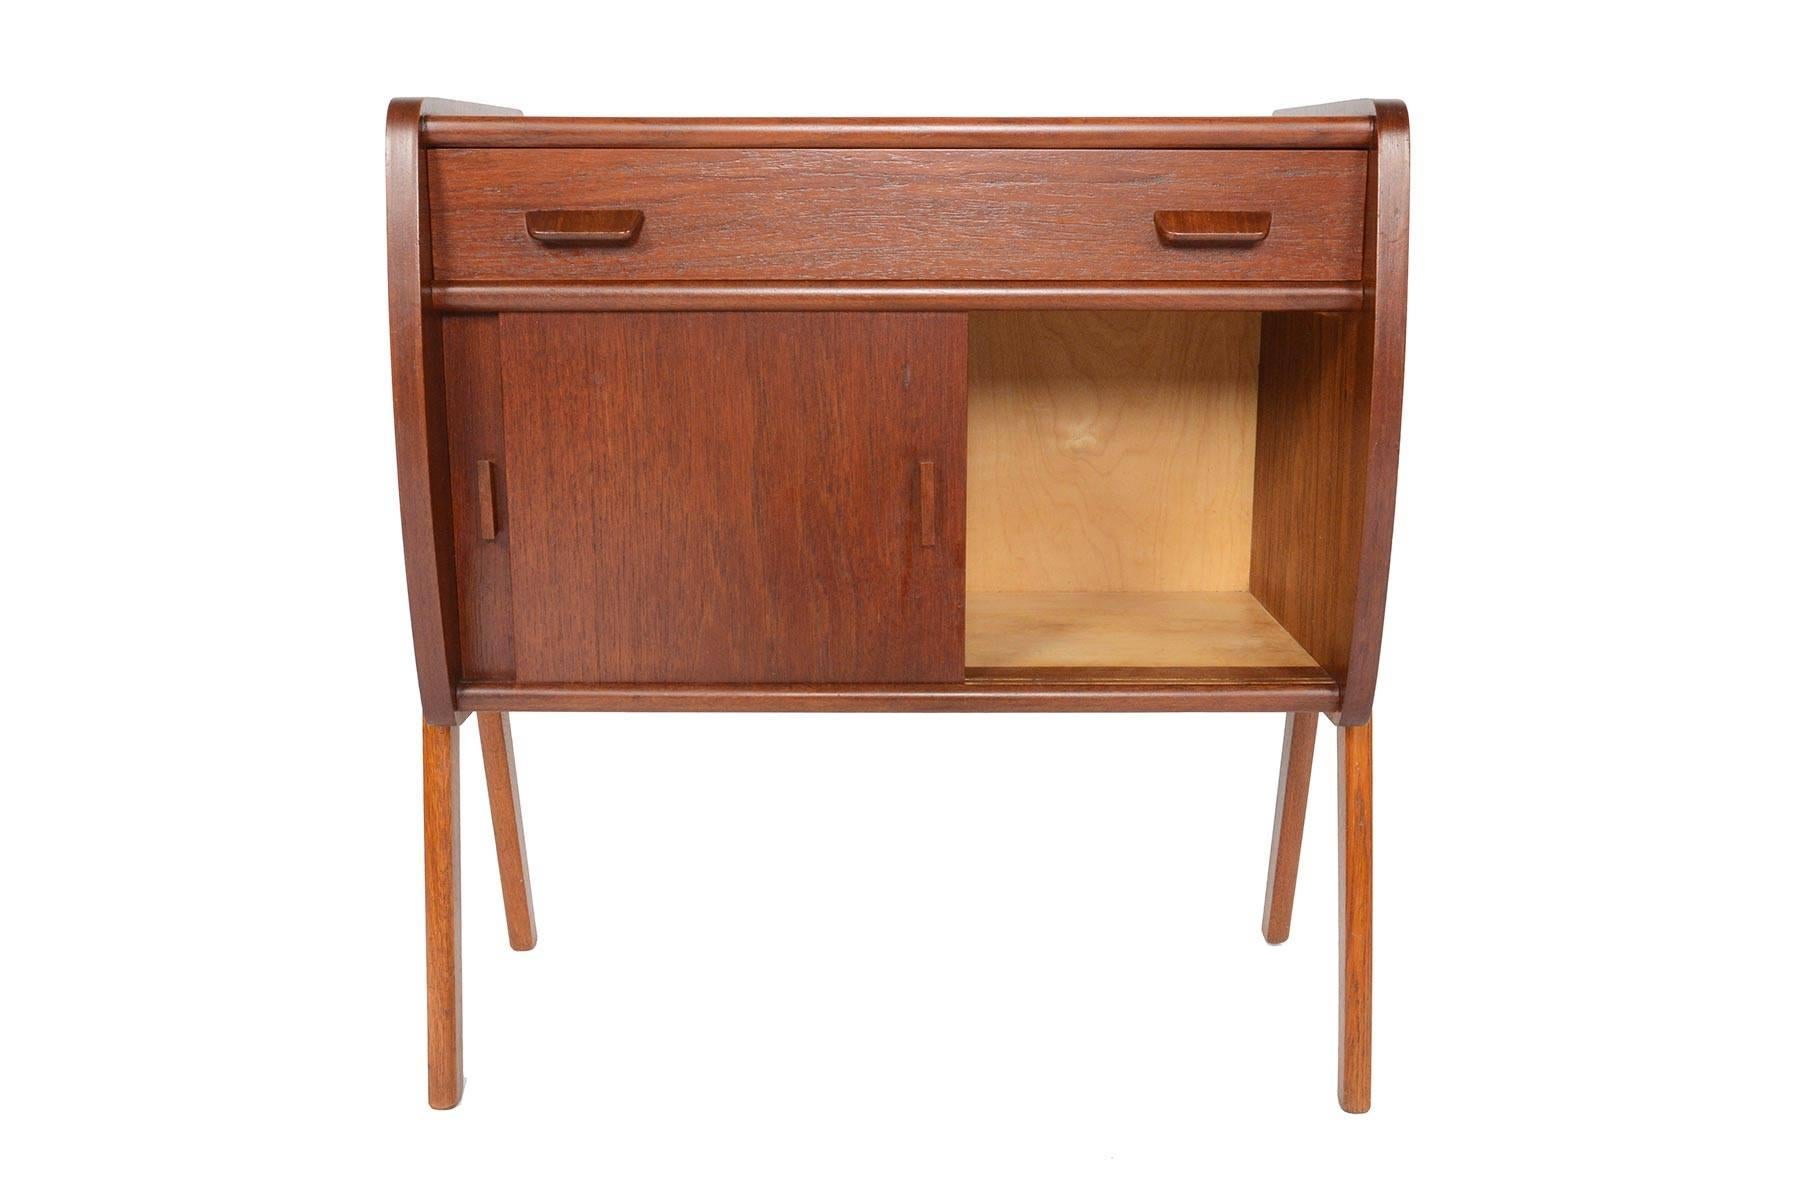 This gorgeous Danish modern midcentury V-legged entry chest will make a great addition to any modern room or entry way. Crafted in teak, the case provides a drawer and a spacious oak- lined interior accessible by sliding doors. Piece stands on solid